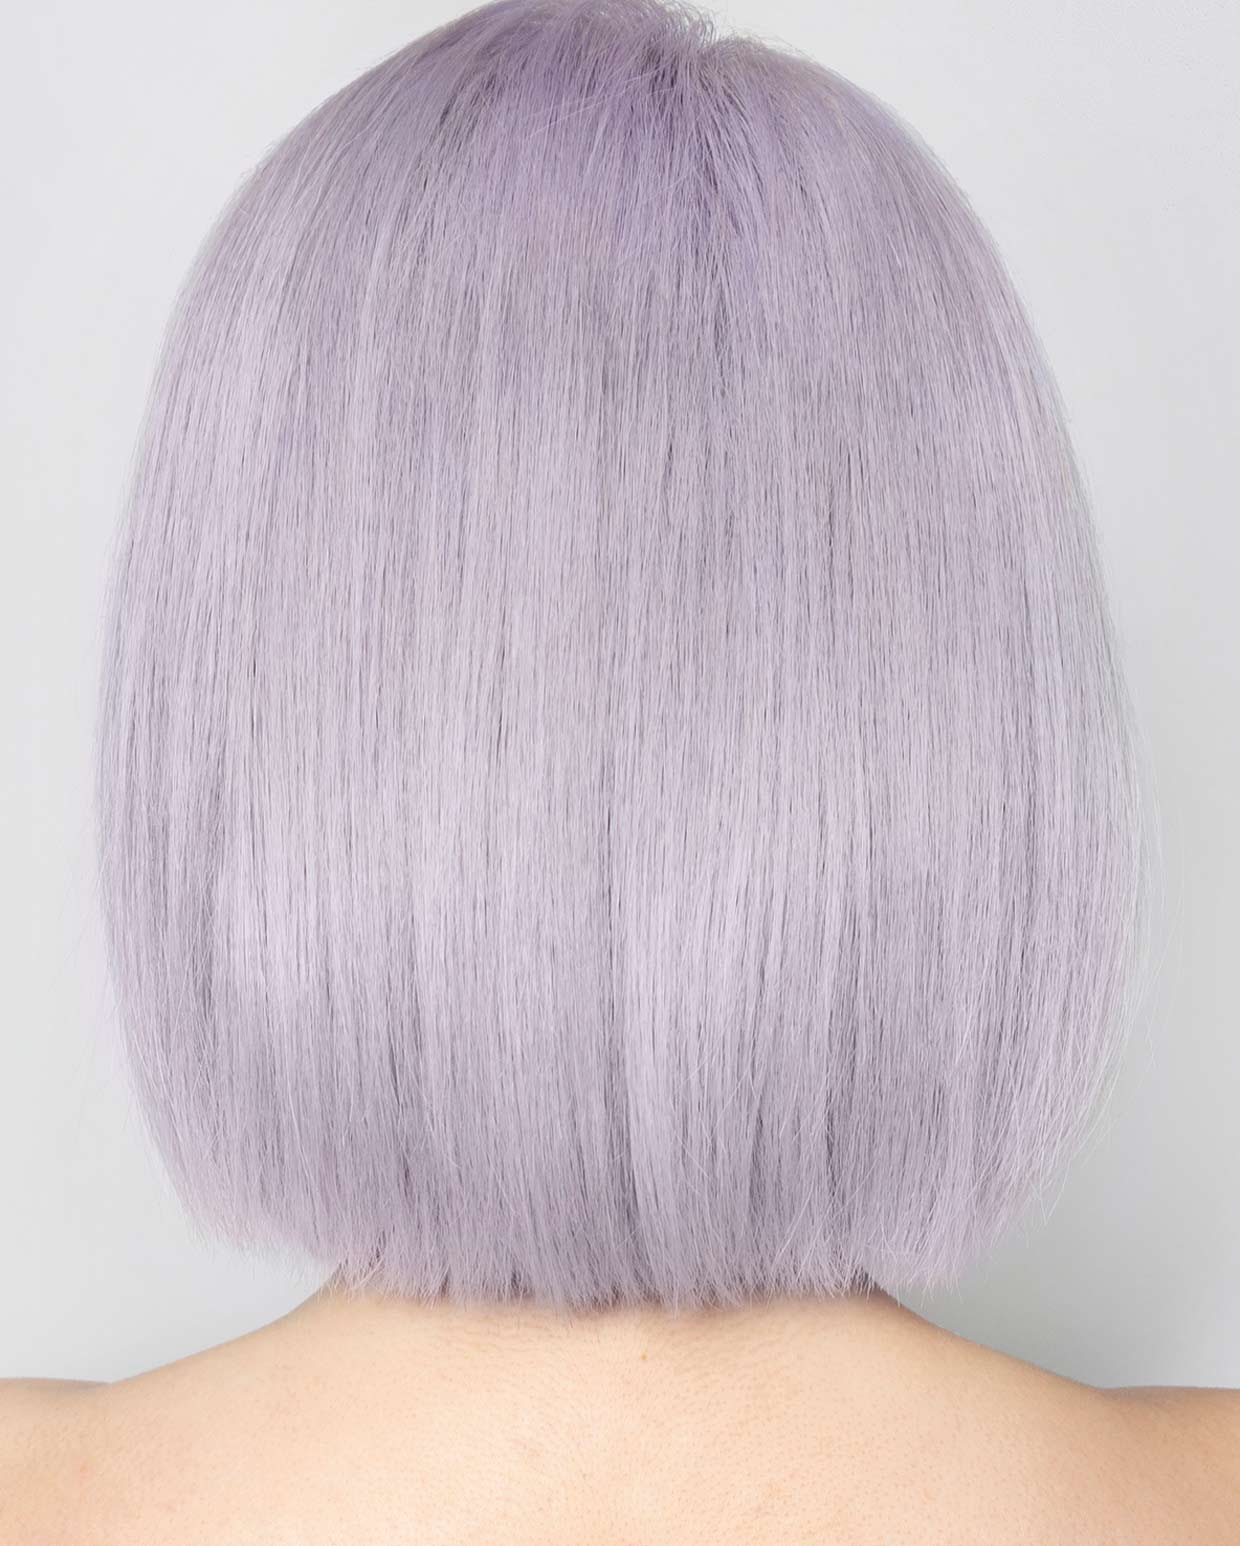 shrine_DROP IT_Product_image_lilac_blonde_hair